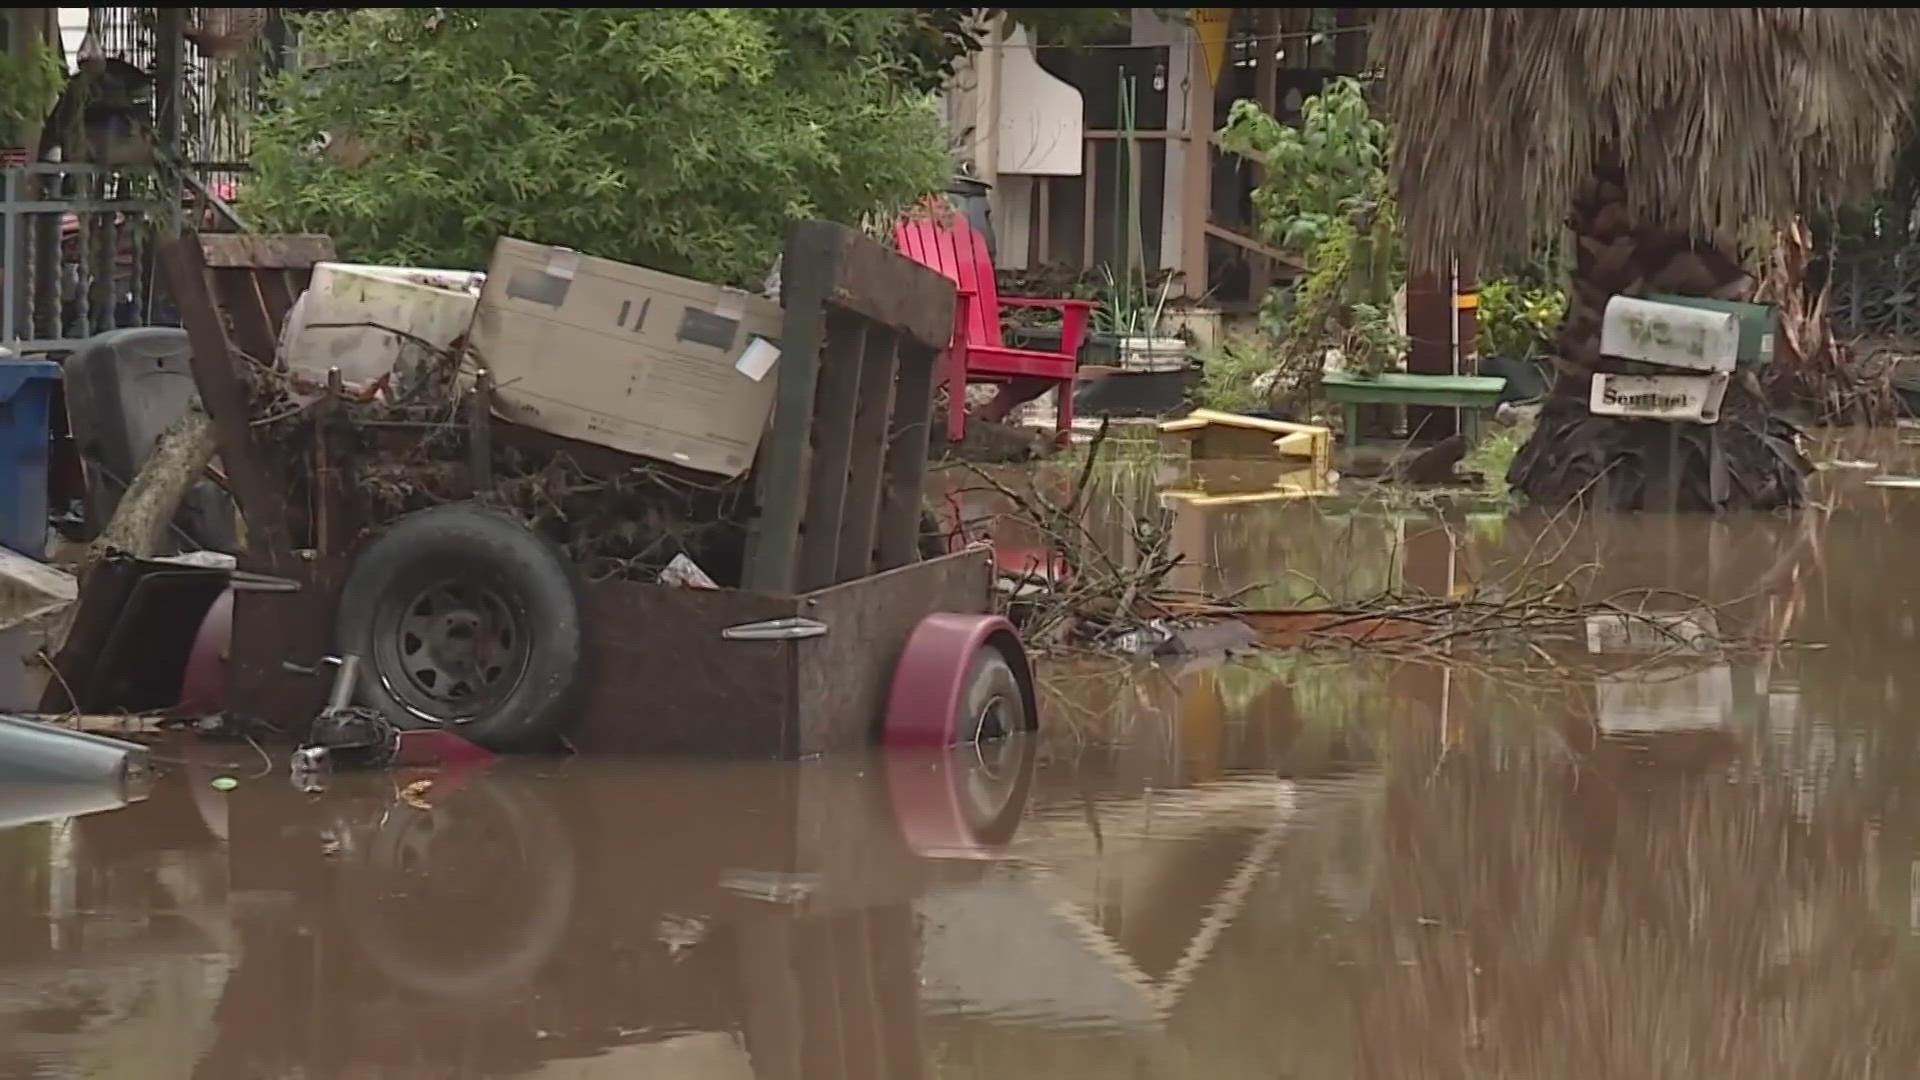 California has been pummeled with torrential rainfall, causing floods and mudslides.